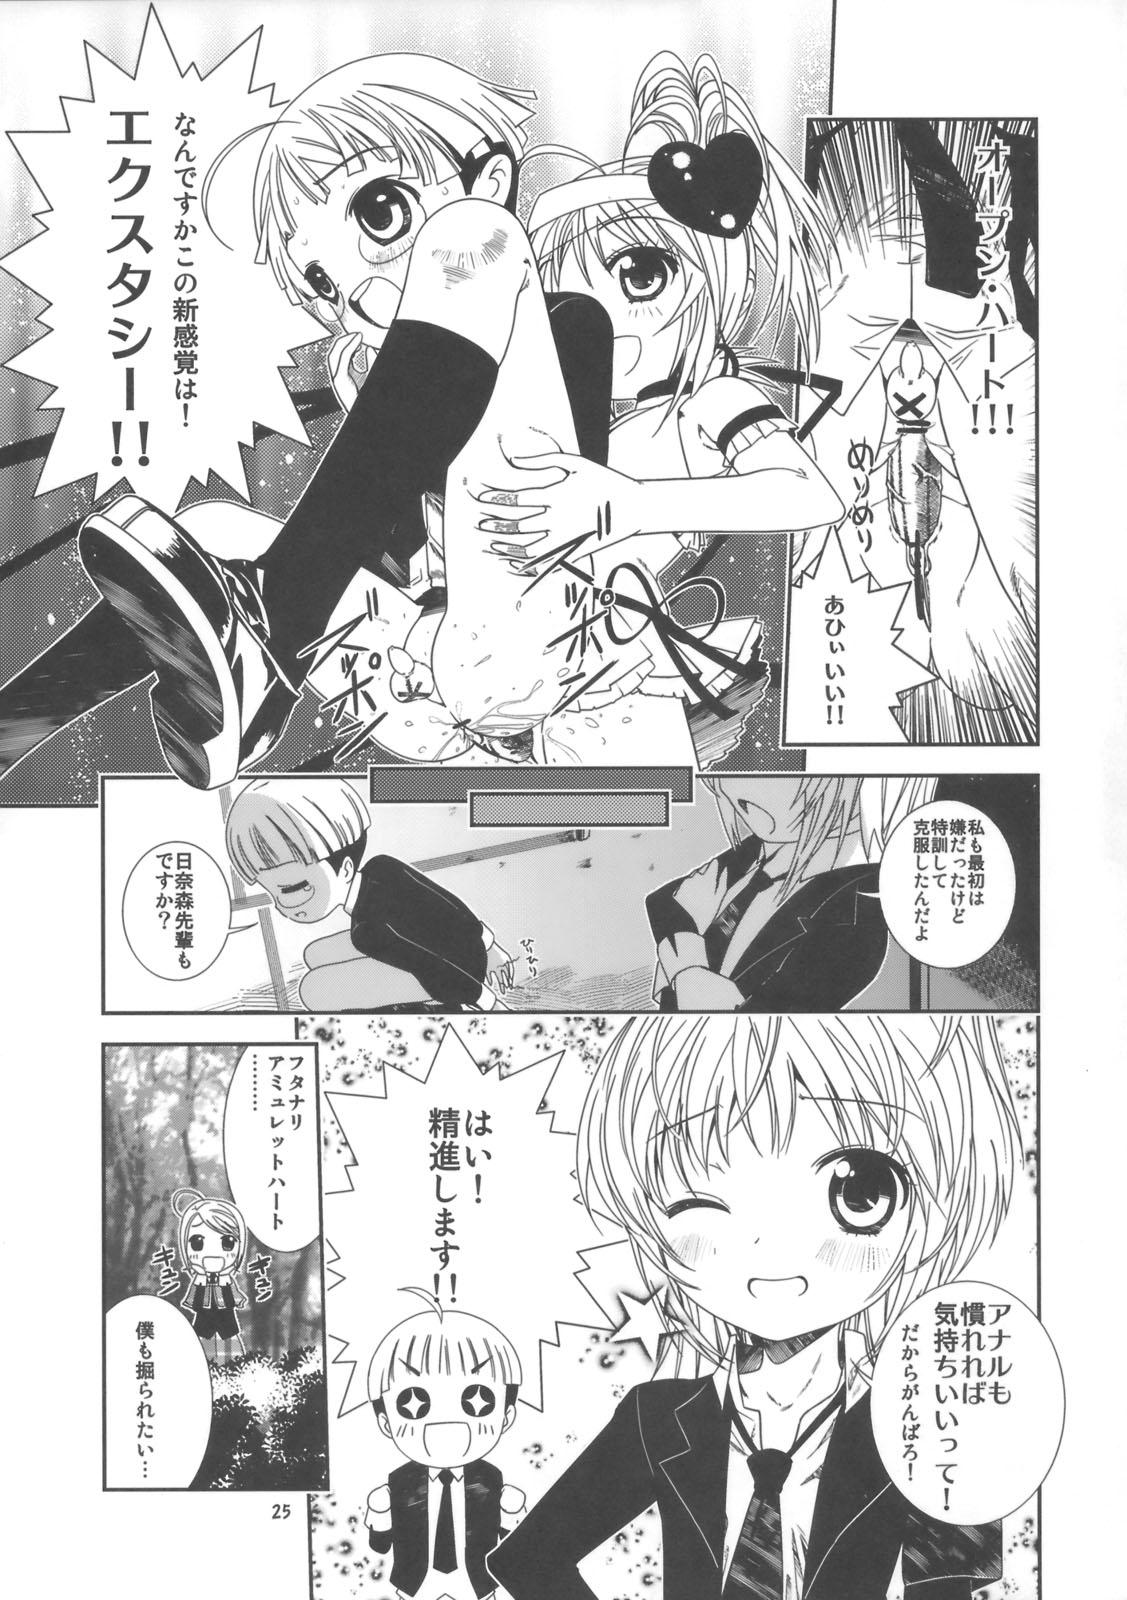 Jerking Off Rimagui - Shugo chara Ejaculations - Page 24